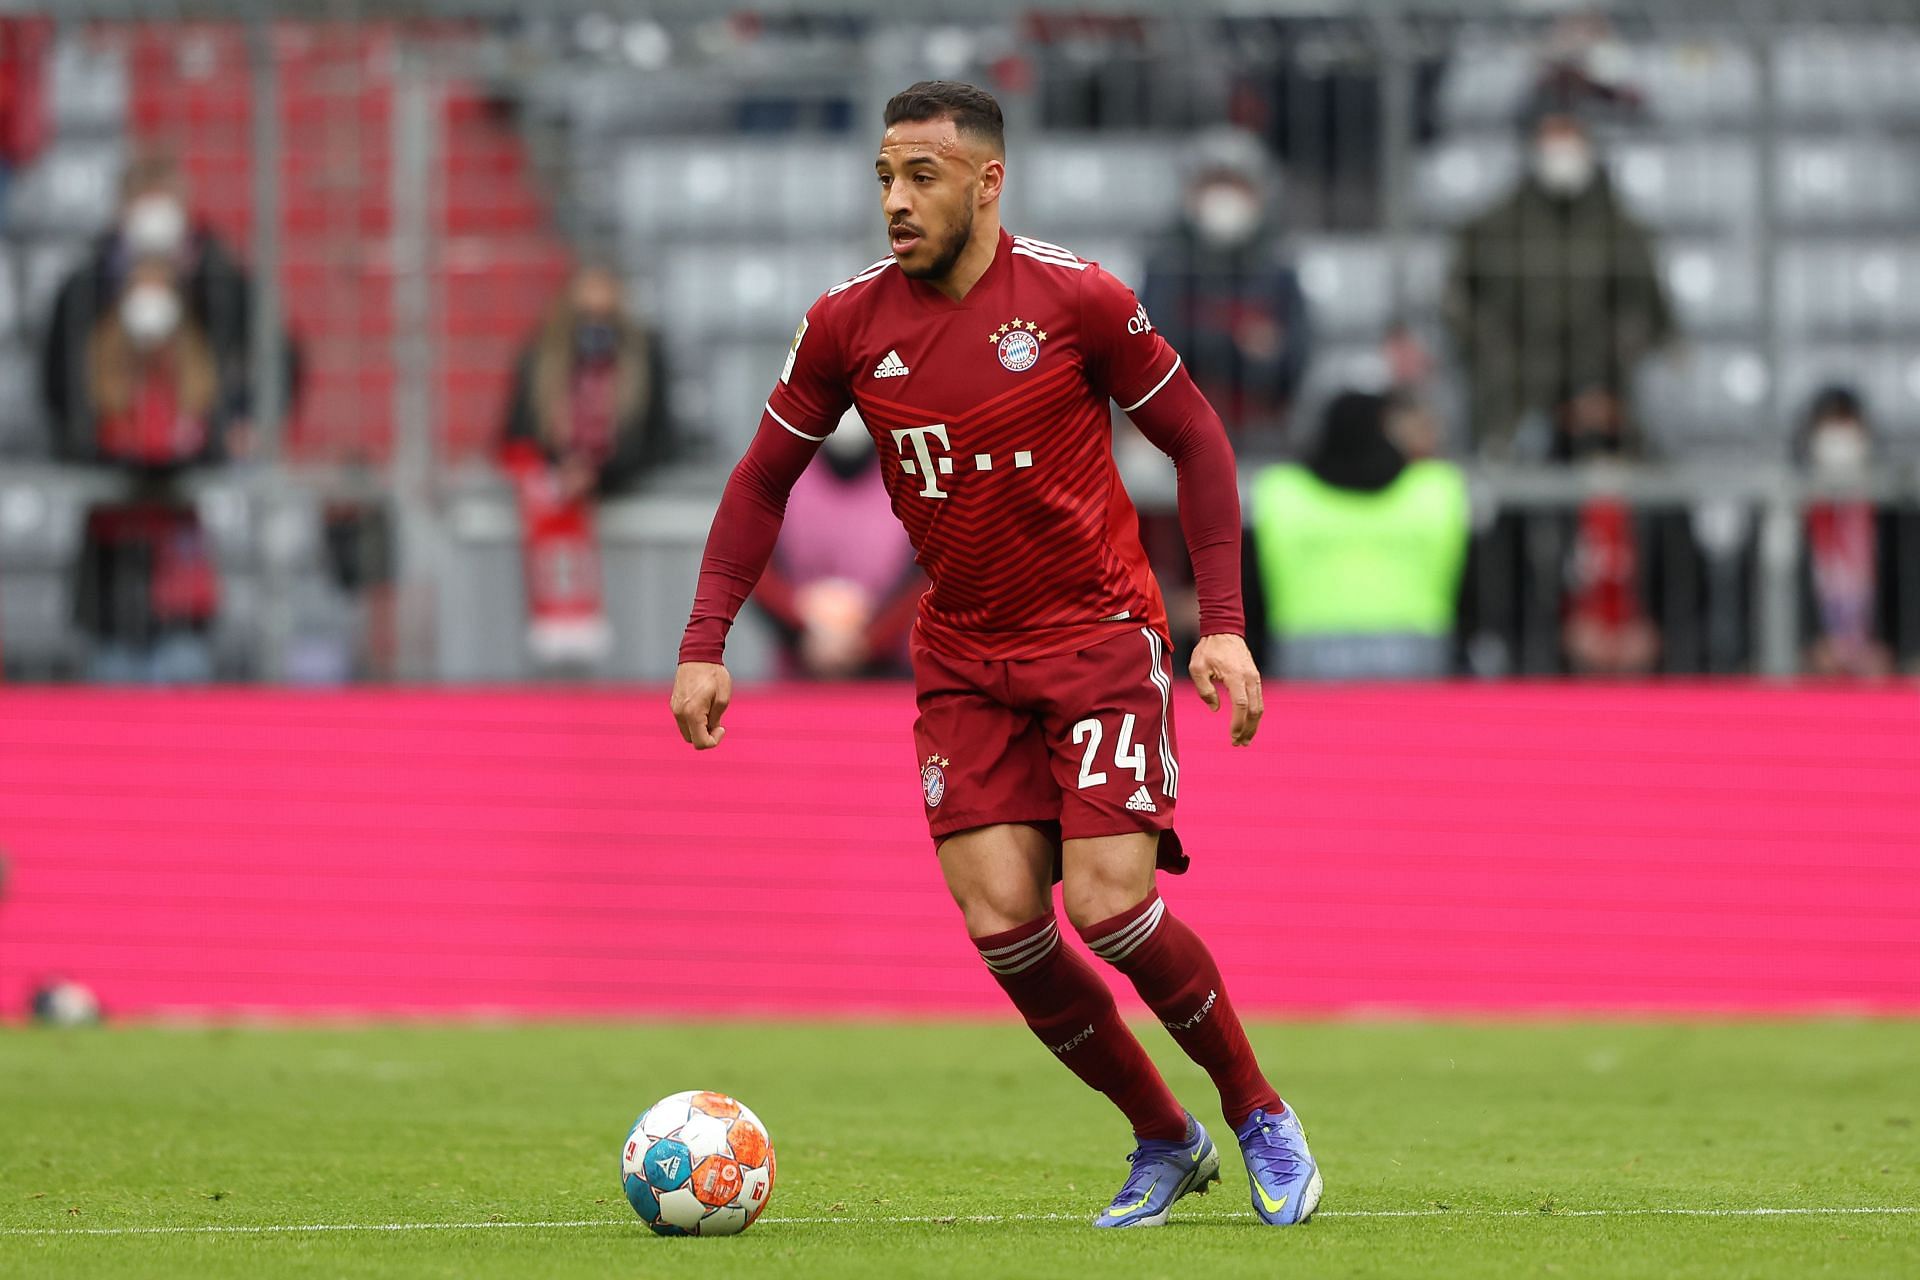 Corentin Tolisso is all set to leave the Allianz Arena this summer.